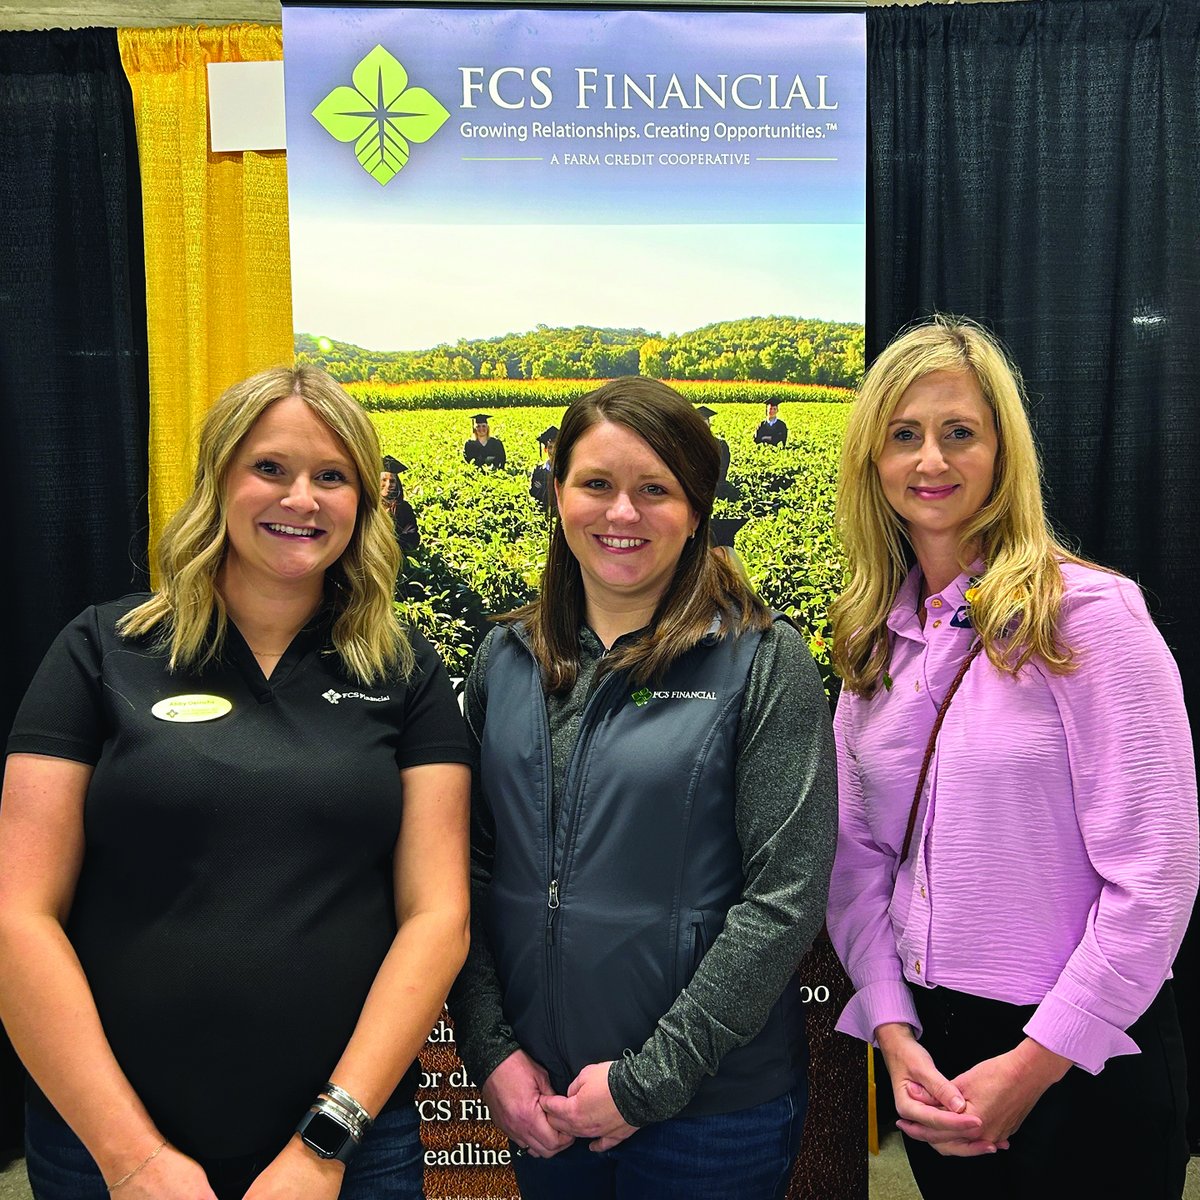 Farm Credit Southeast Missouri recently cohosted a booth with @FCSFinancial at the 96th Missouri FFA Convention. Kathy Hendley, Appraiser, assisted in educating participants about the Farm Credit System and the loan types we offer. #FarmCredit #AgEducation #FFA #FutureFarmers